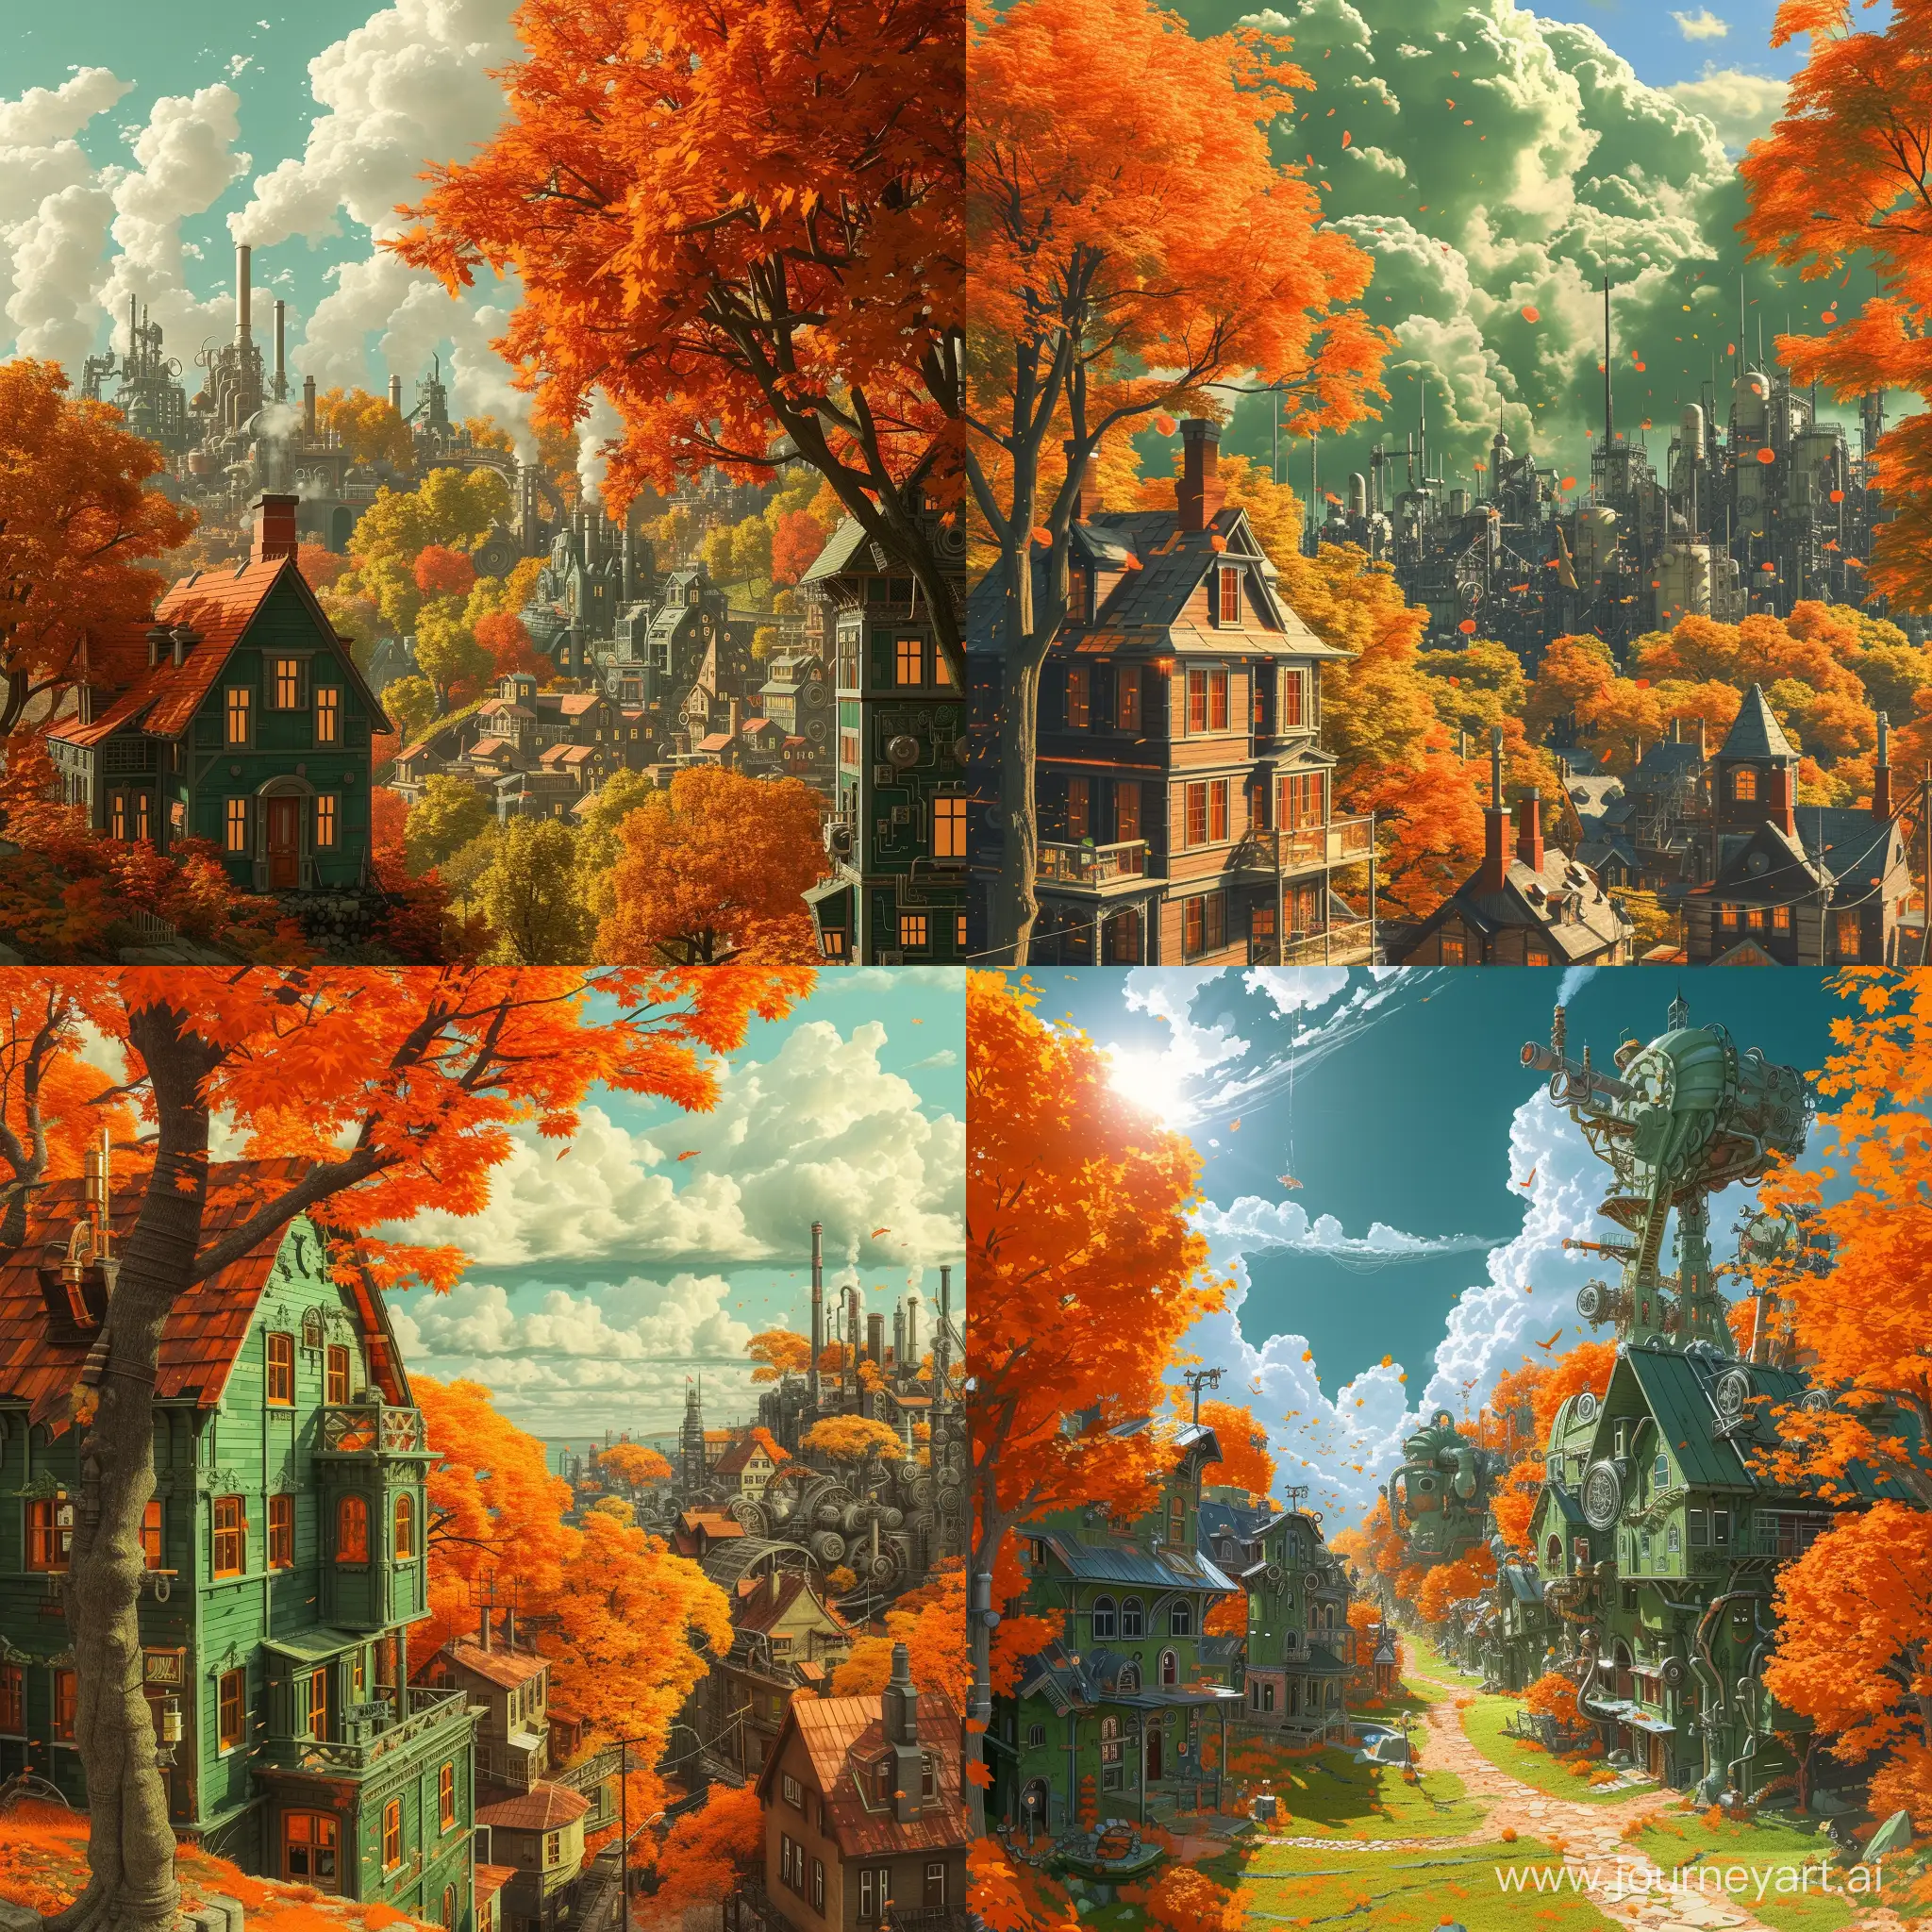 Vibrant-Steampunk-Cityscape-with-Maple-Trees-HighQuality-Amazon-Wallpaper